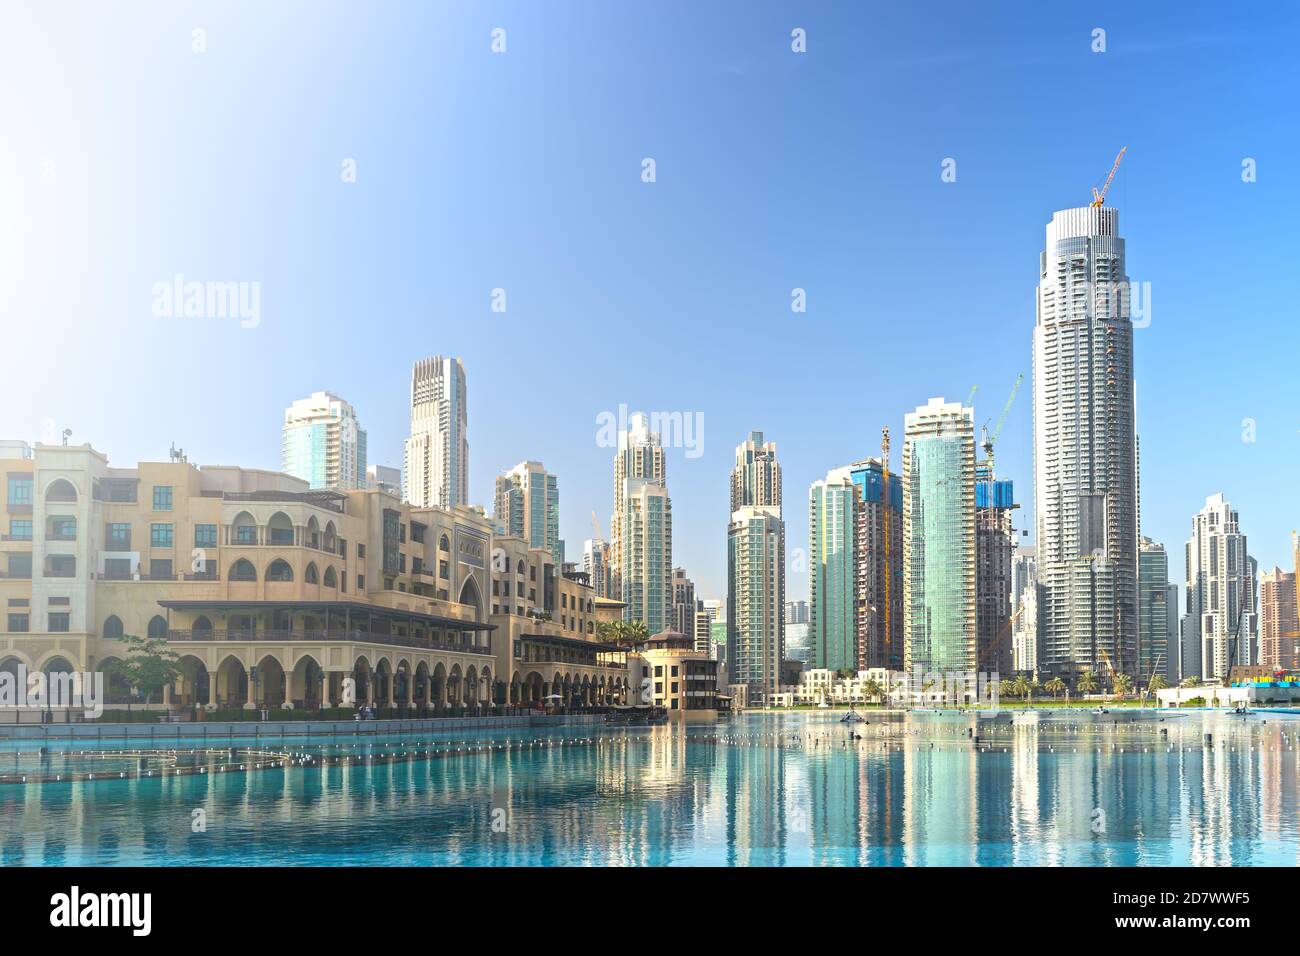 Downtown Dubai skyline in morning with high rise buildings reflected in pool water. United Arab Emirates, UAE. Stock Photo